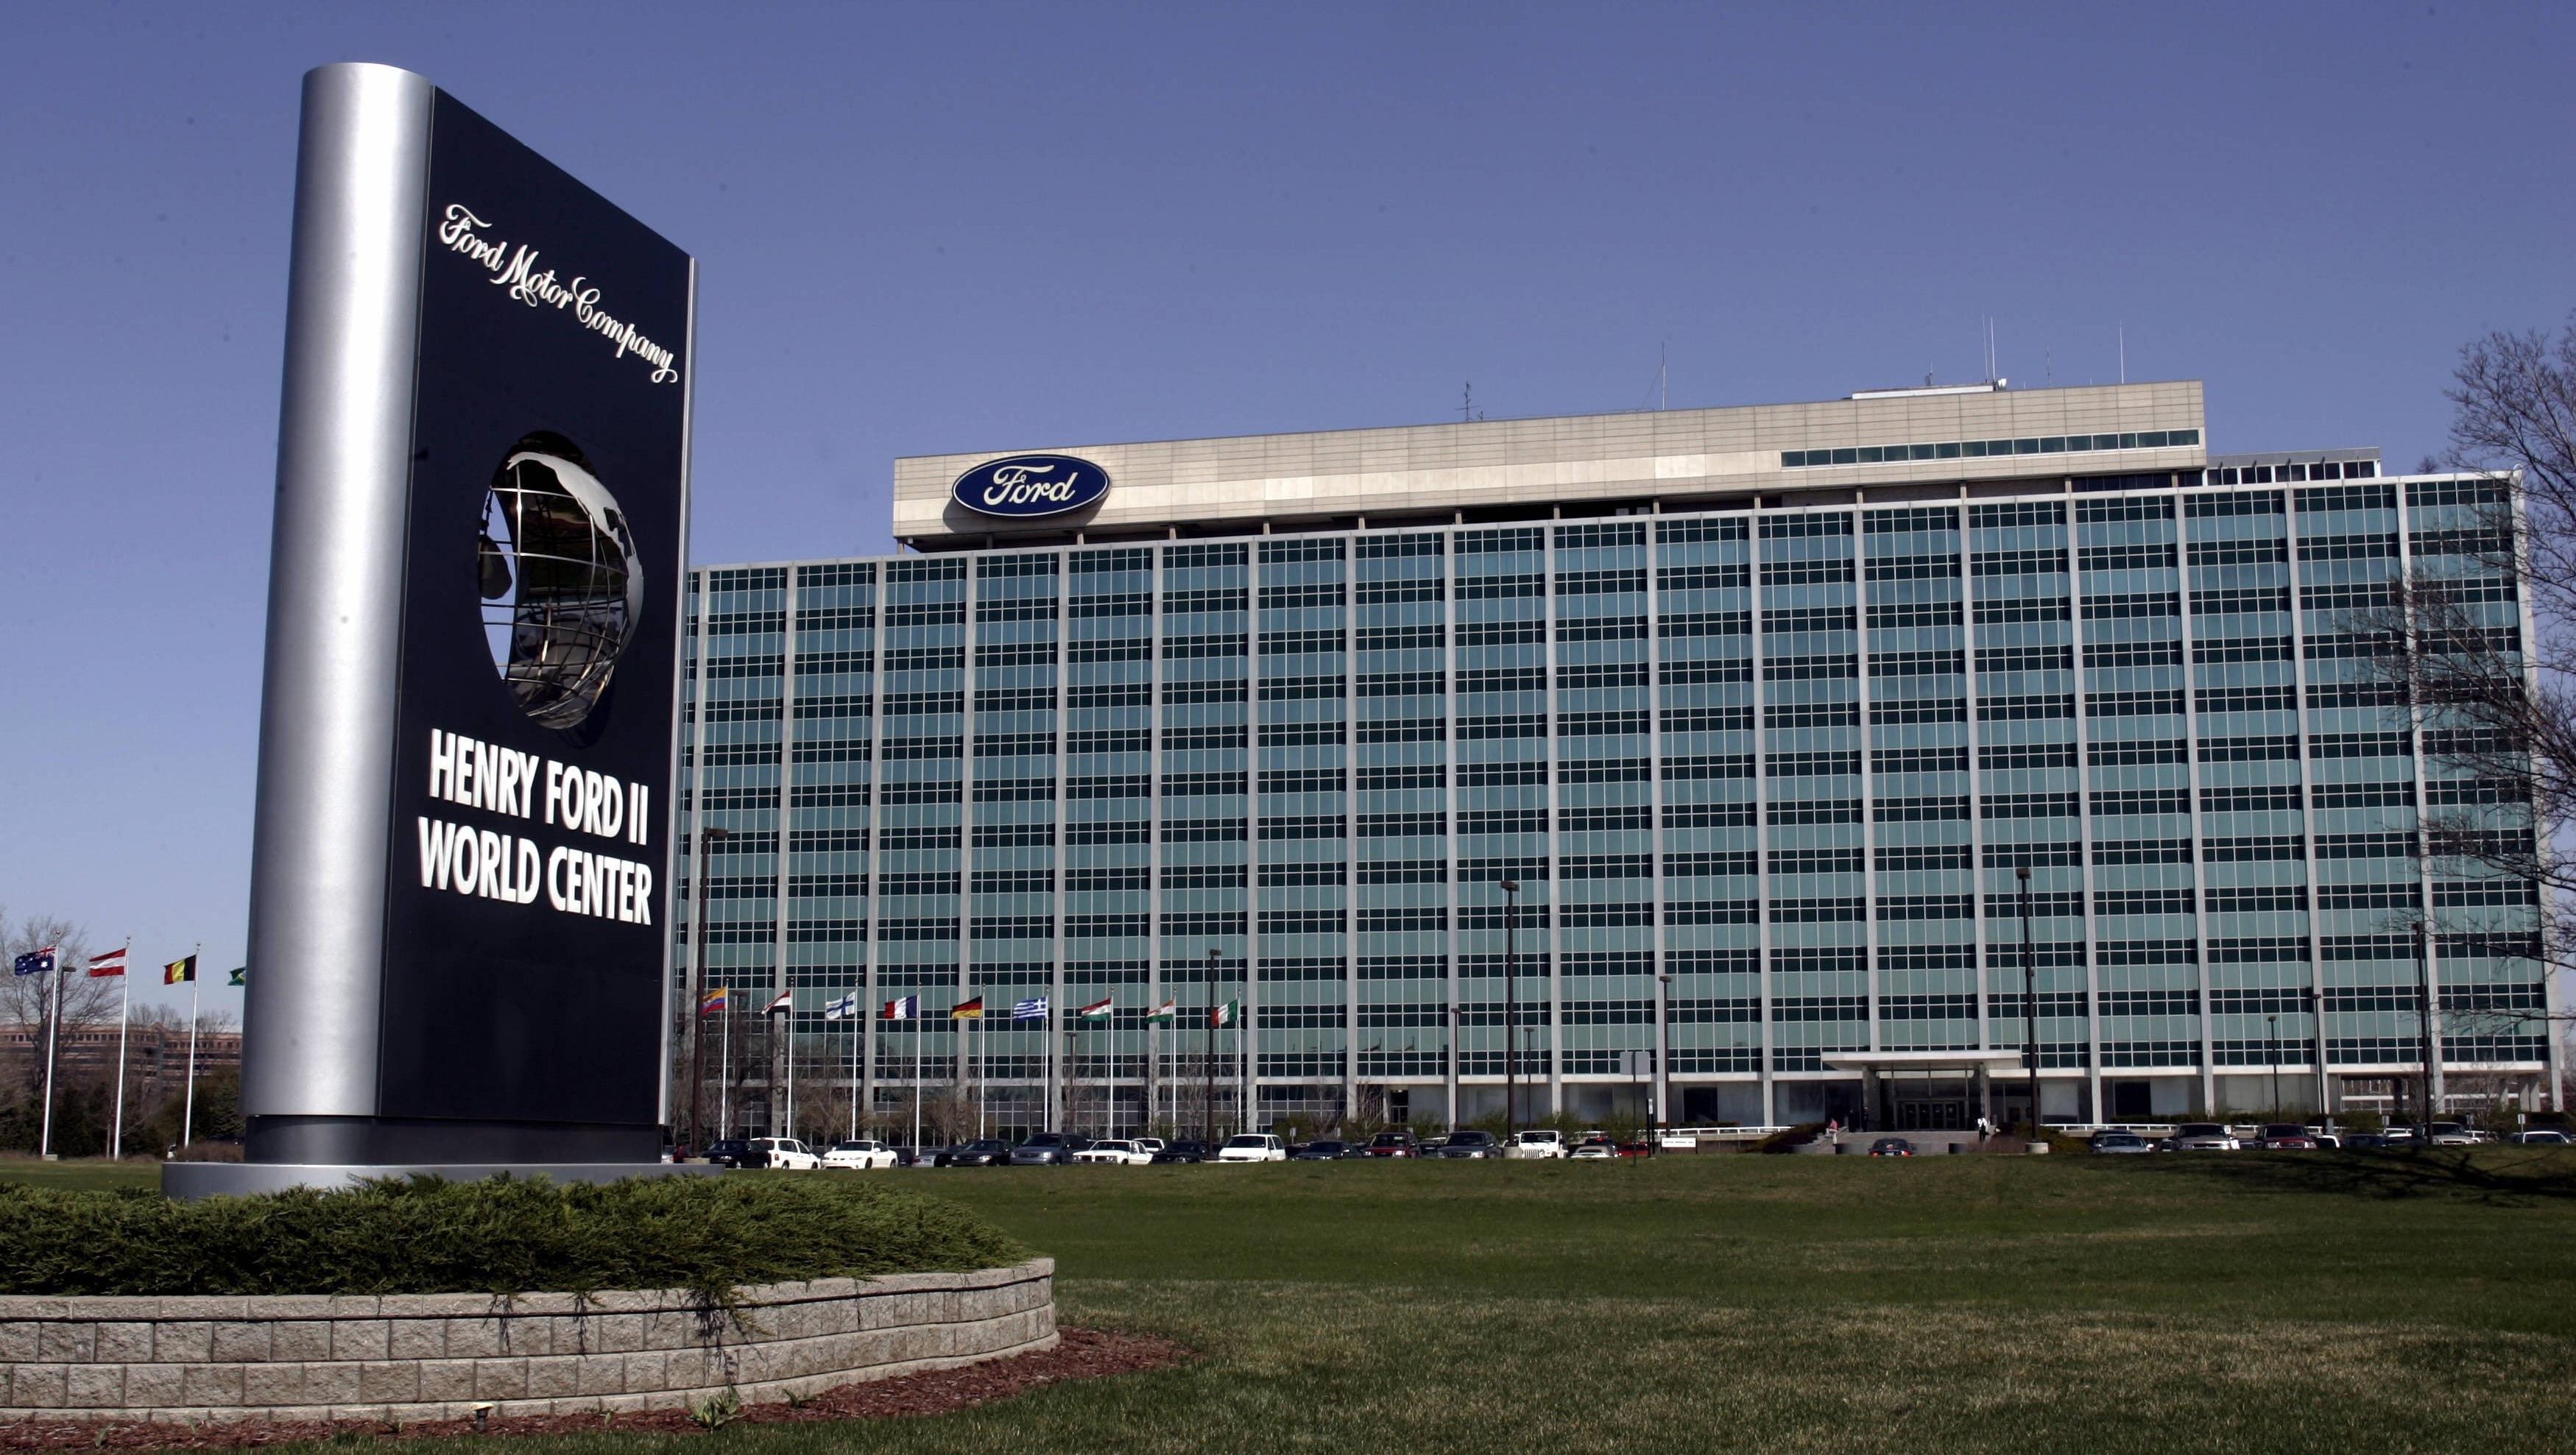 The world headquarters for the Ford Motor Company in Dearborn.